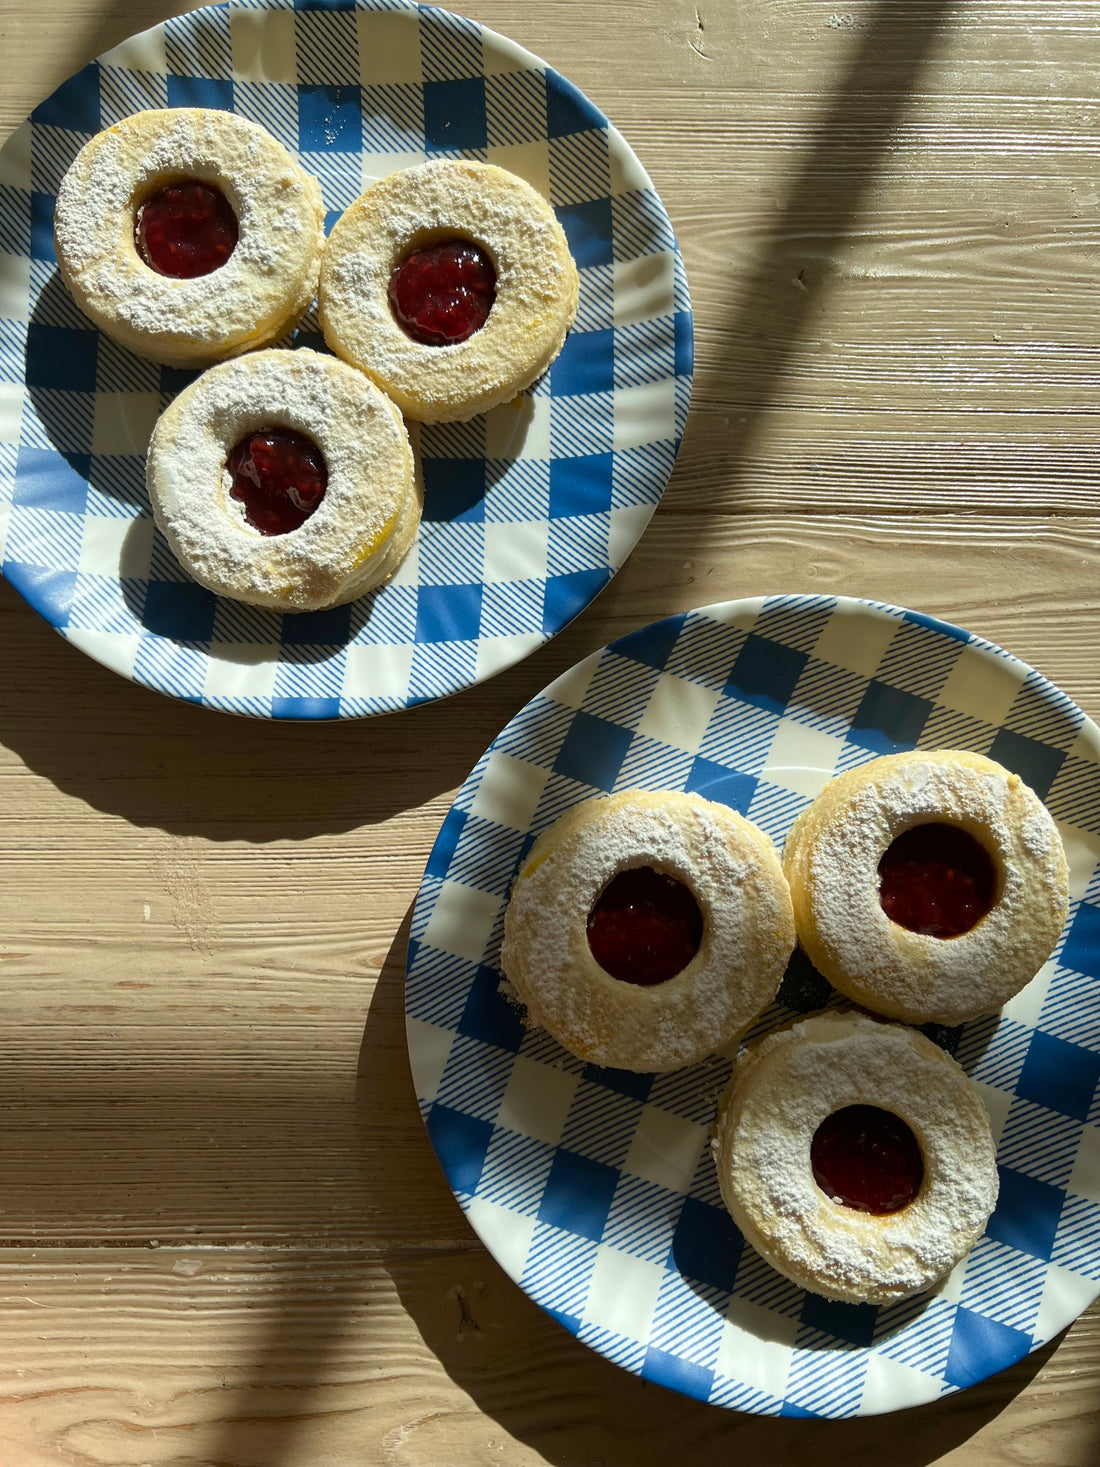 Raspberry Jam Shortbread Cookies: A fun and easy baking project for kids